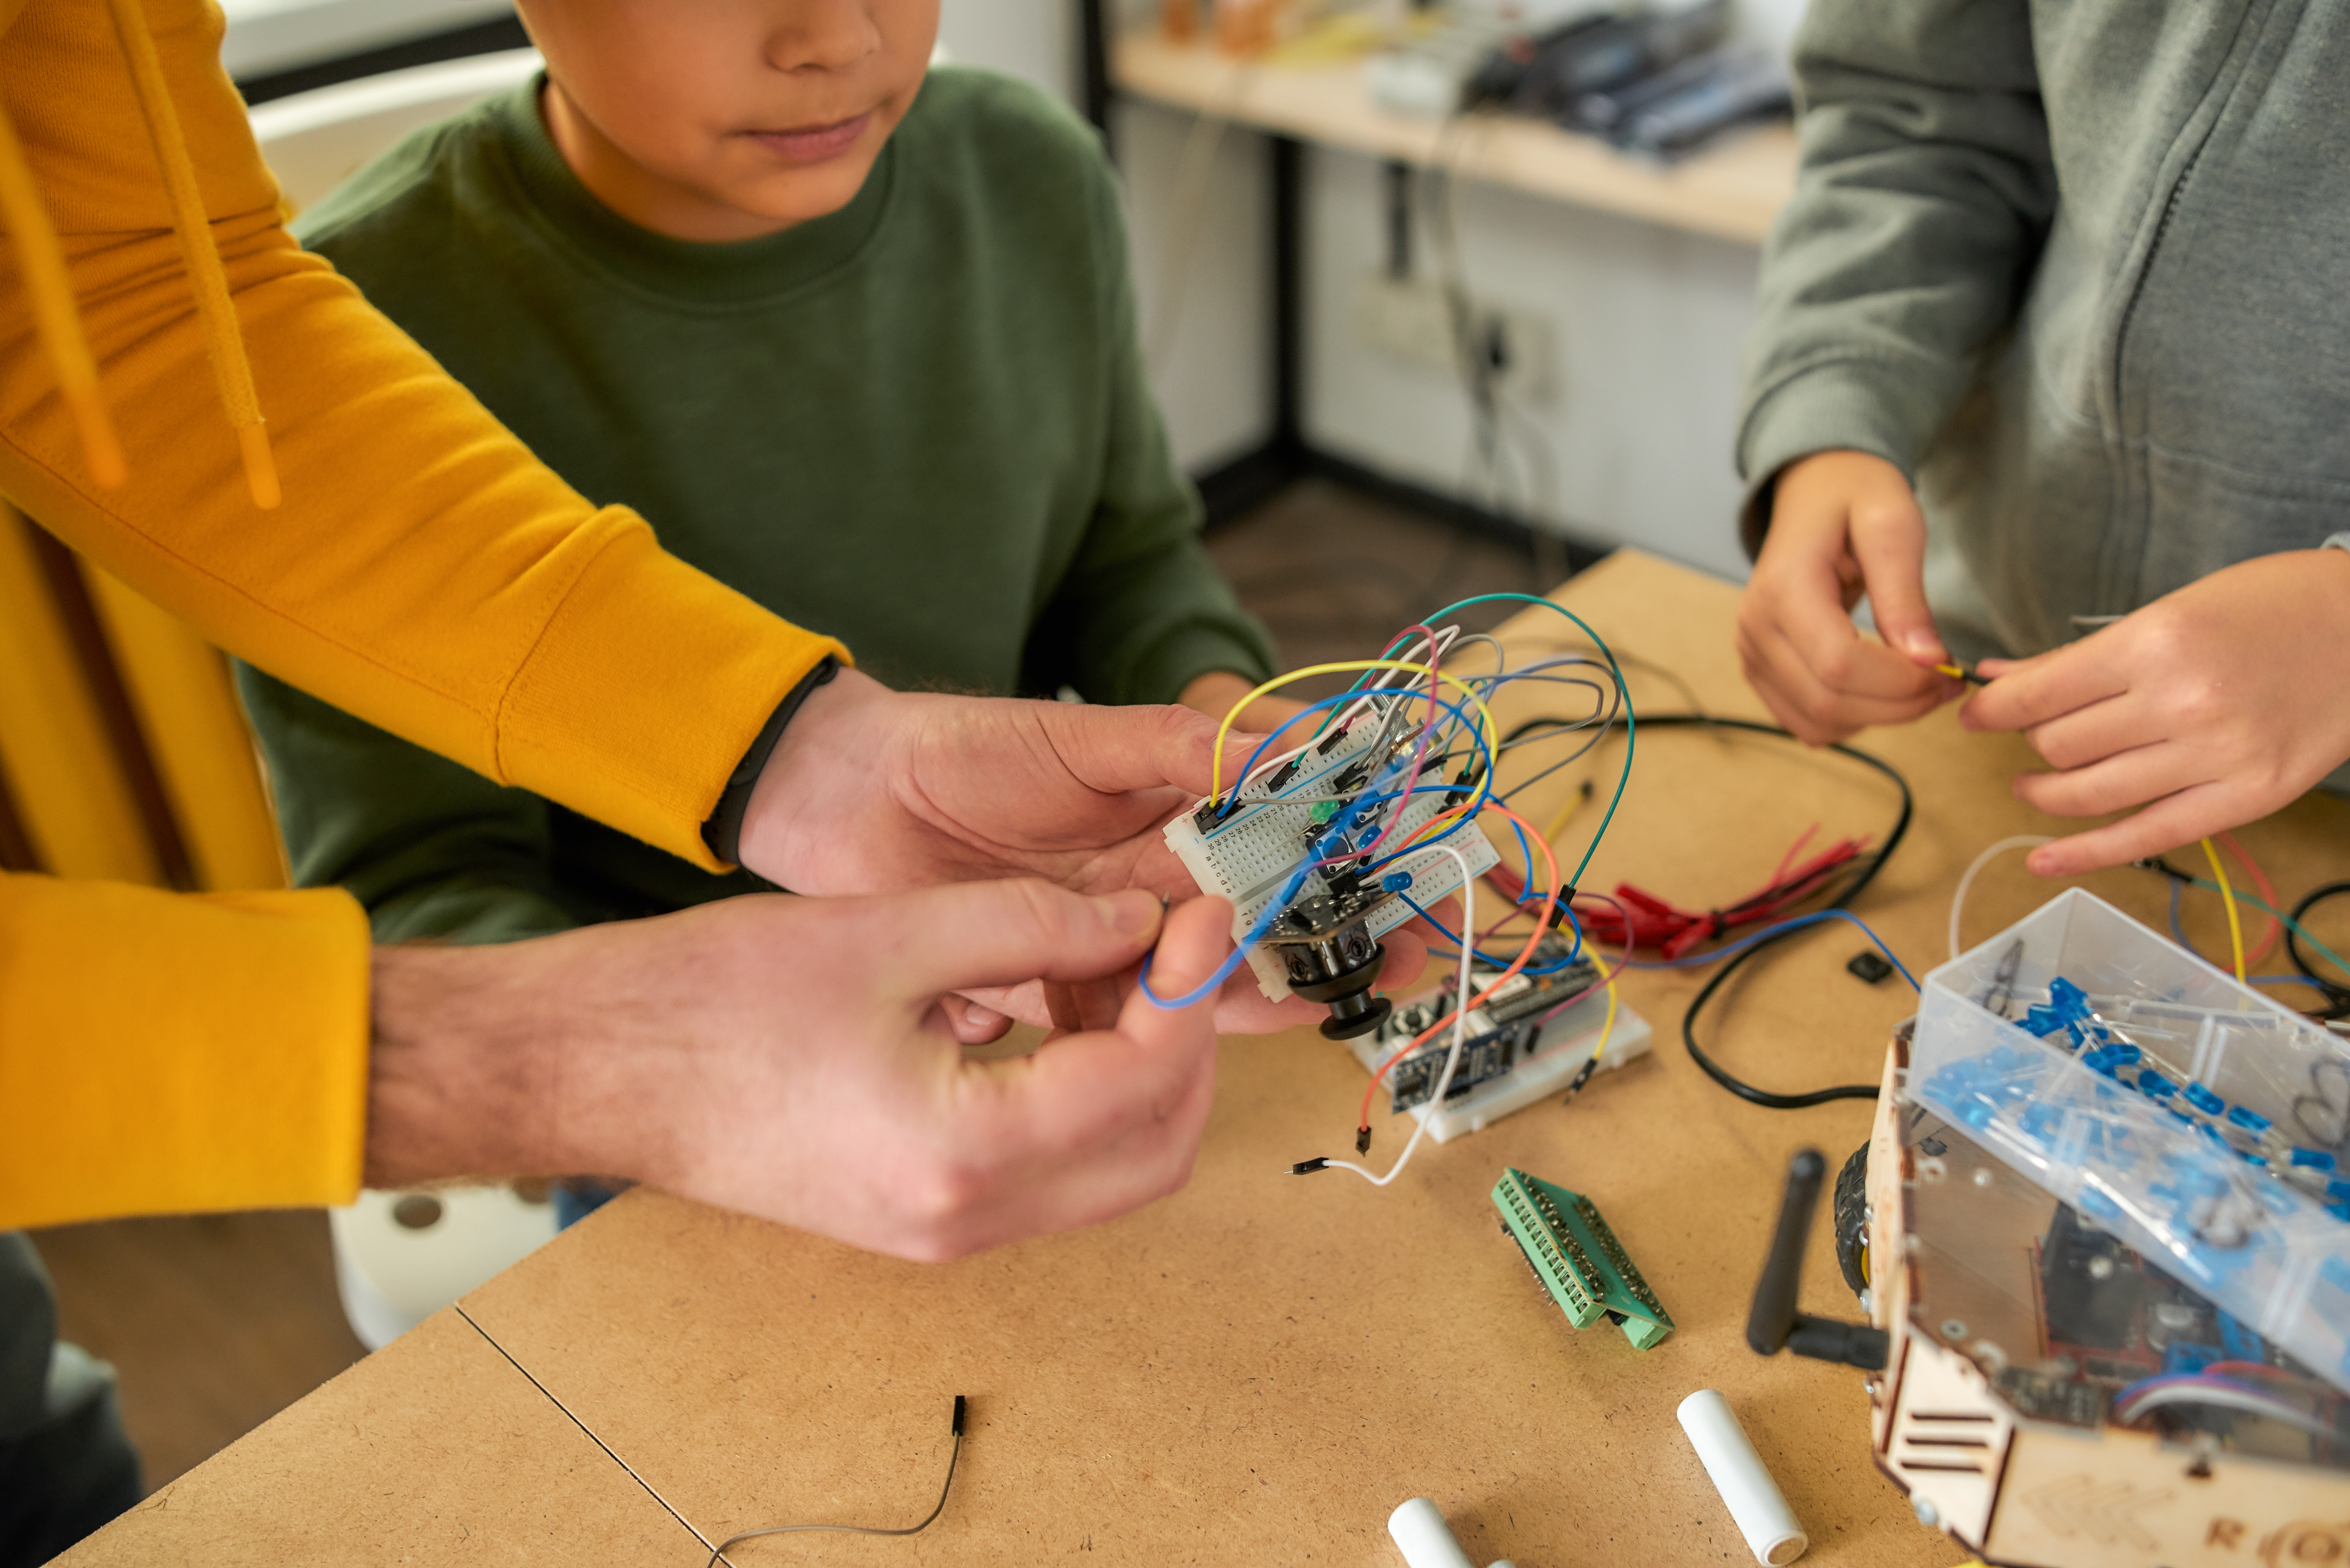 students and teacher working on breadboard with wires